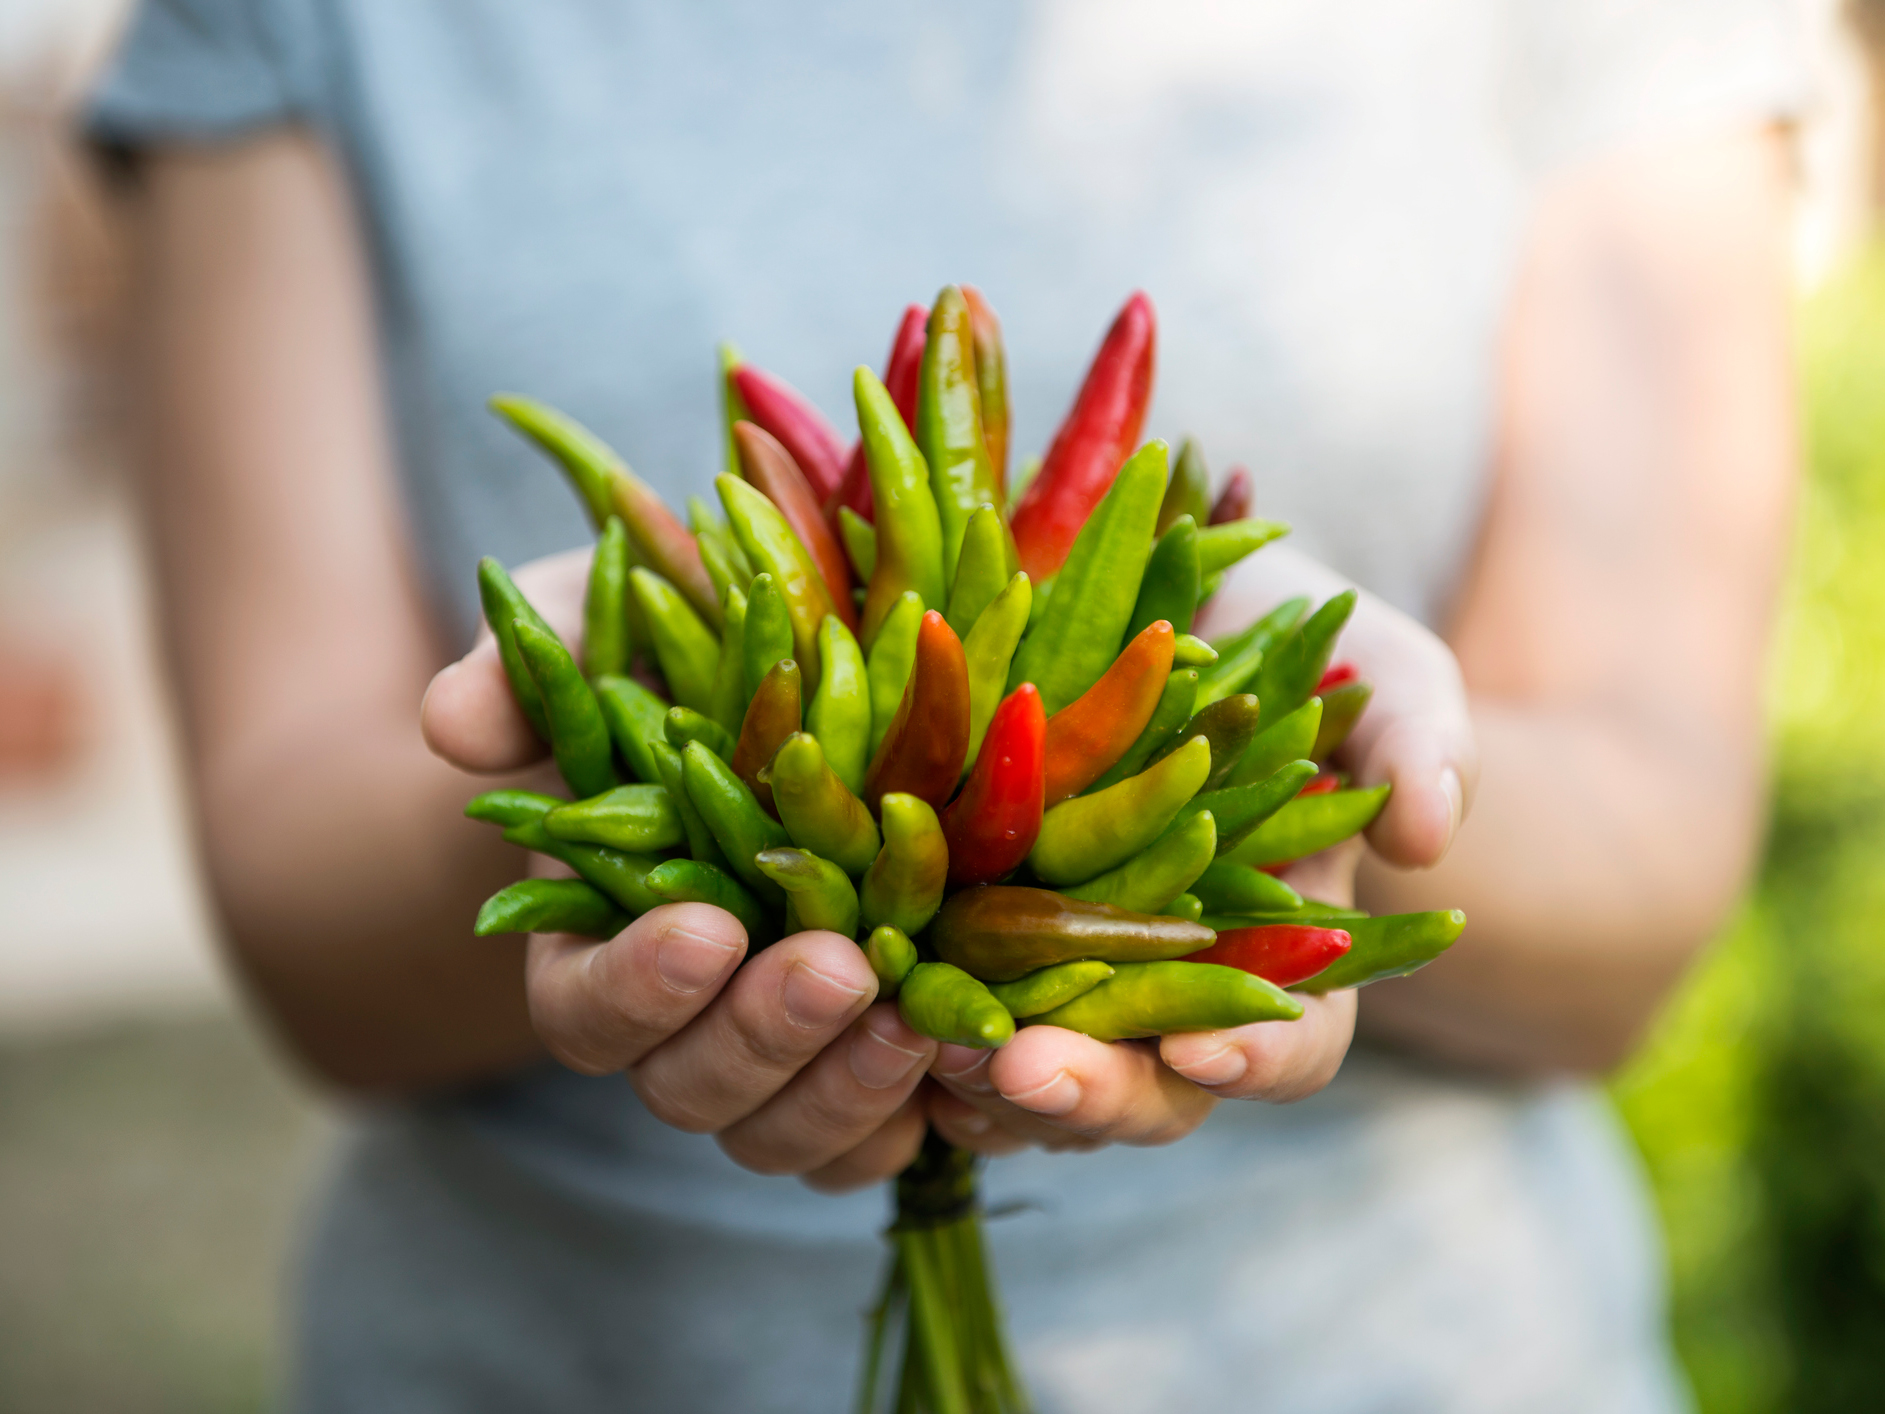 How to heat things up to cool down pain with capsaicin